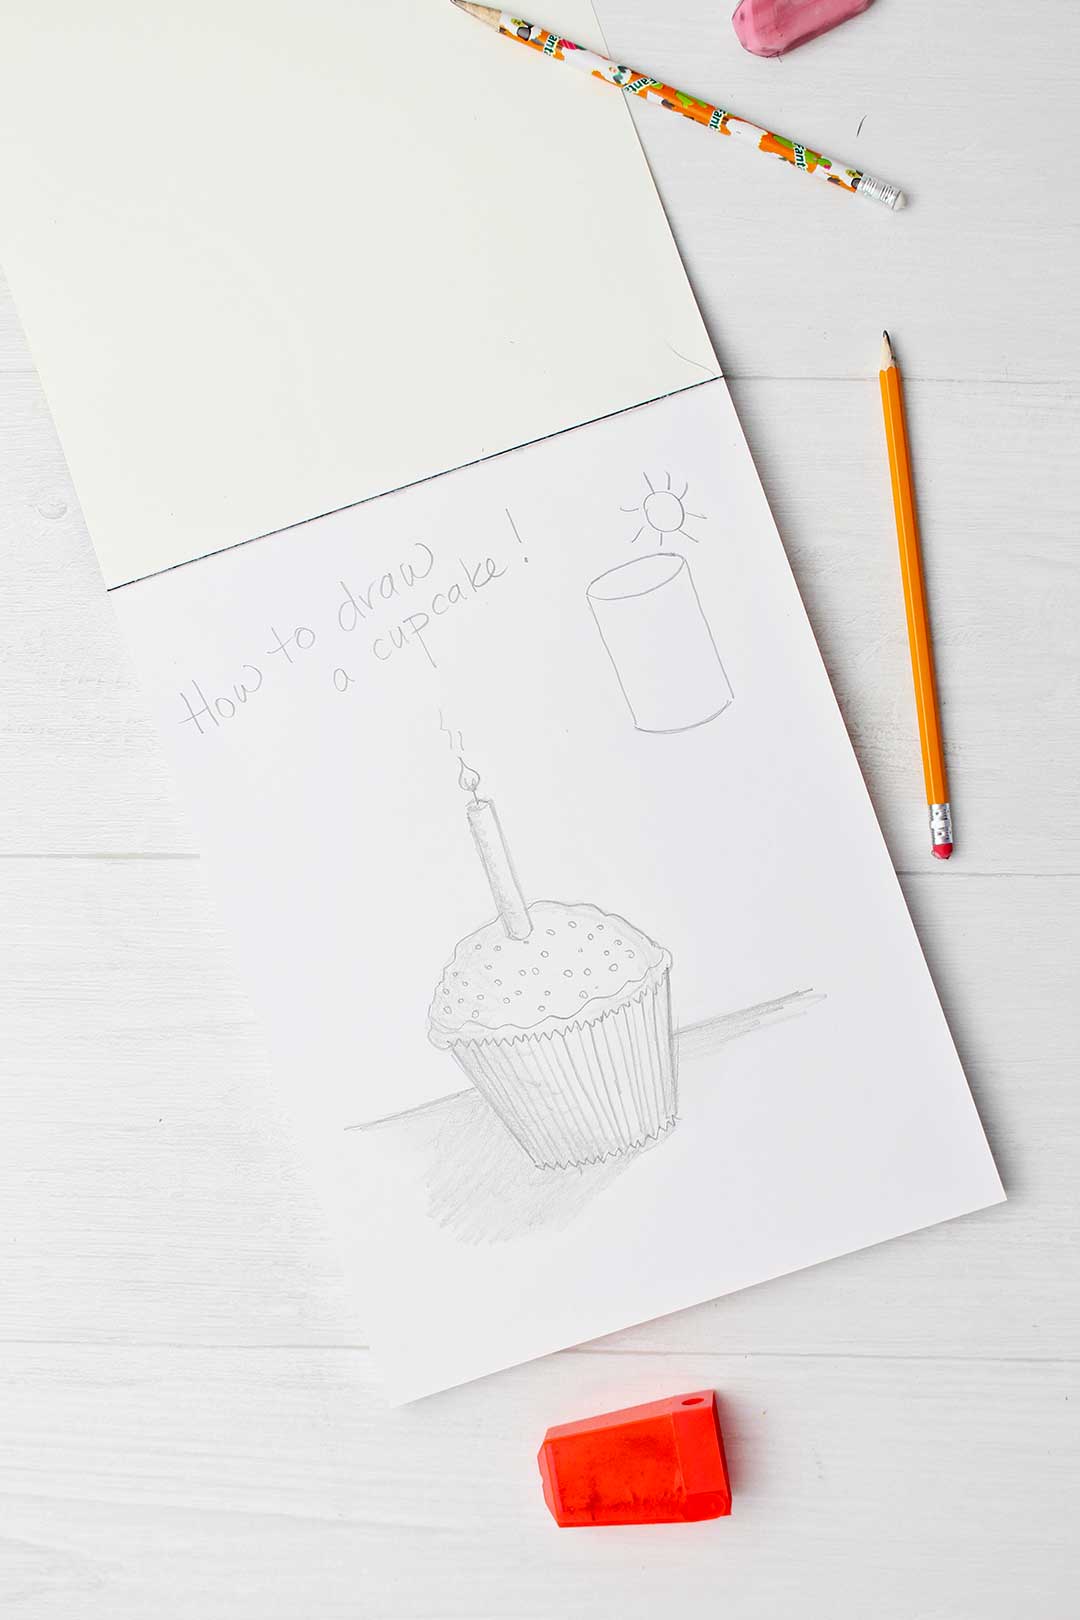 How To Draw Cupcakes - Easy Cupcake Drawing - Free Transparent PNG Download  - PNGkey